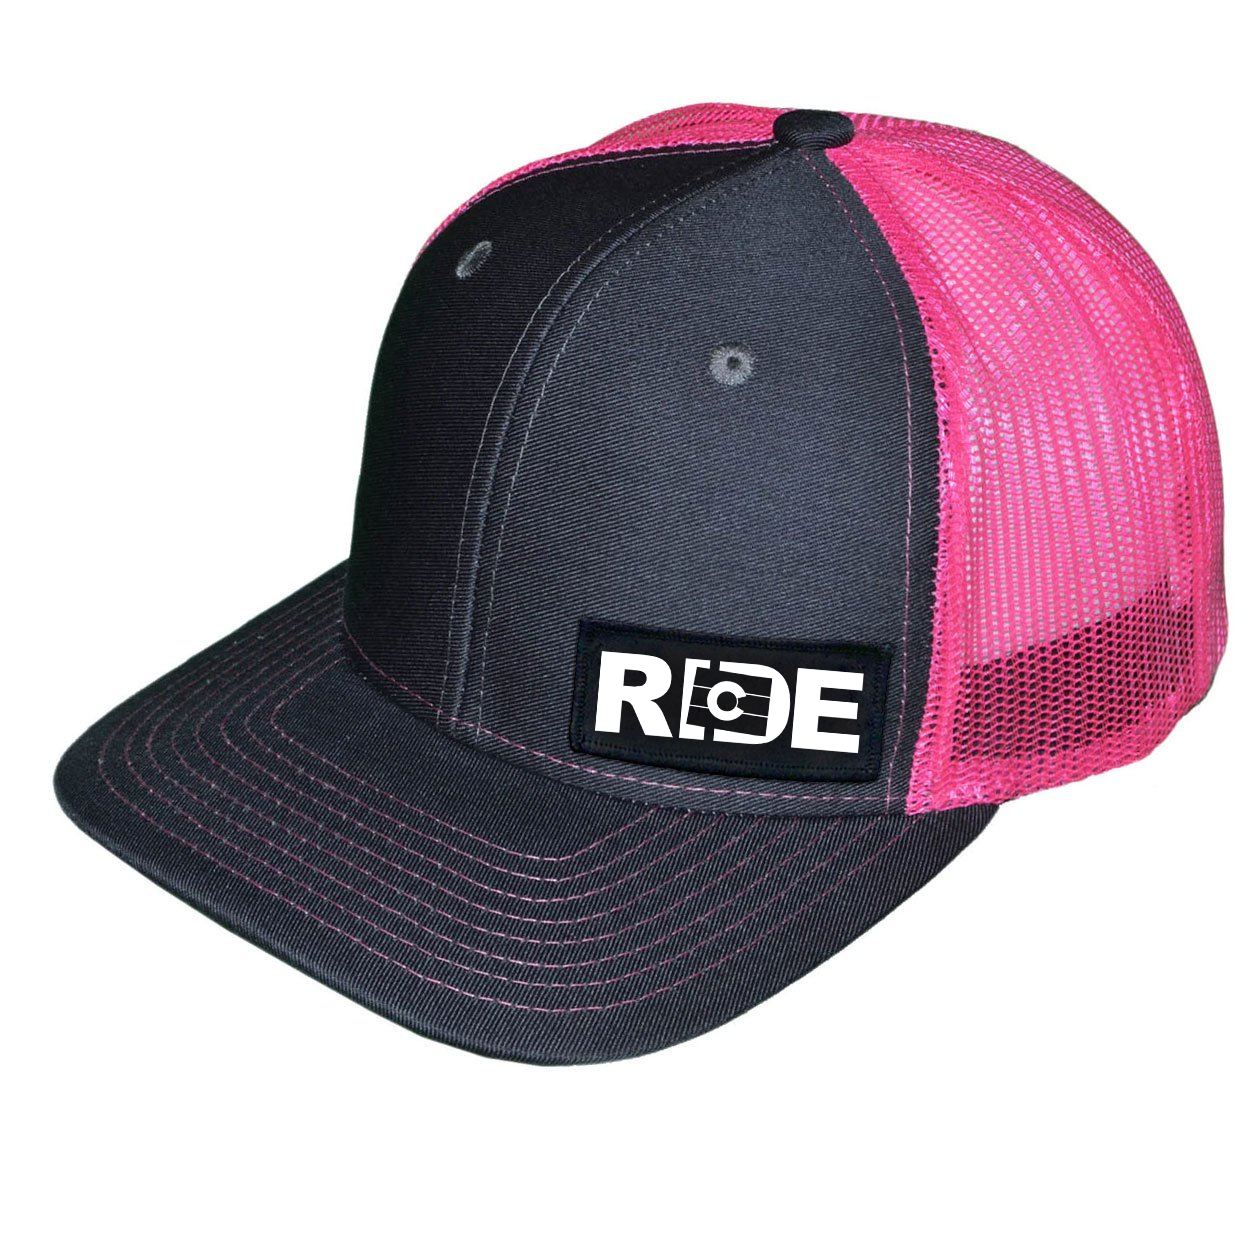 Ride Colorado Night Out Woven Patch Snapback Trucker Hat Dark Gray/Neon Pink (White Logo)